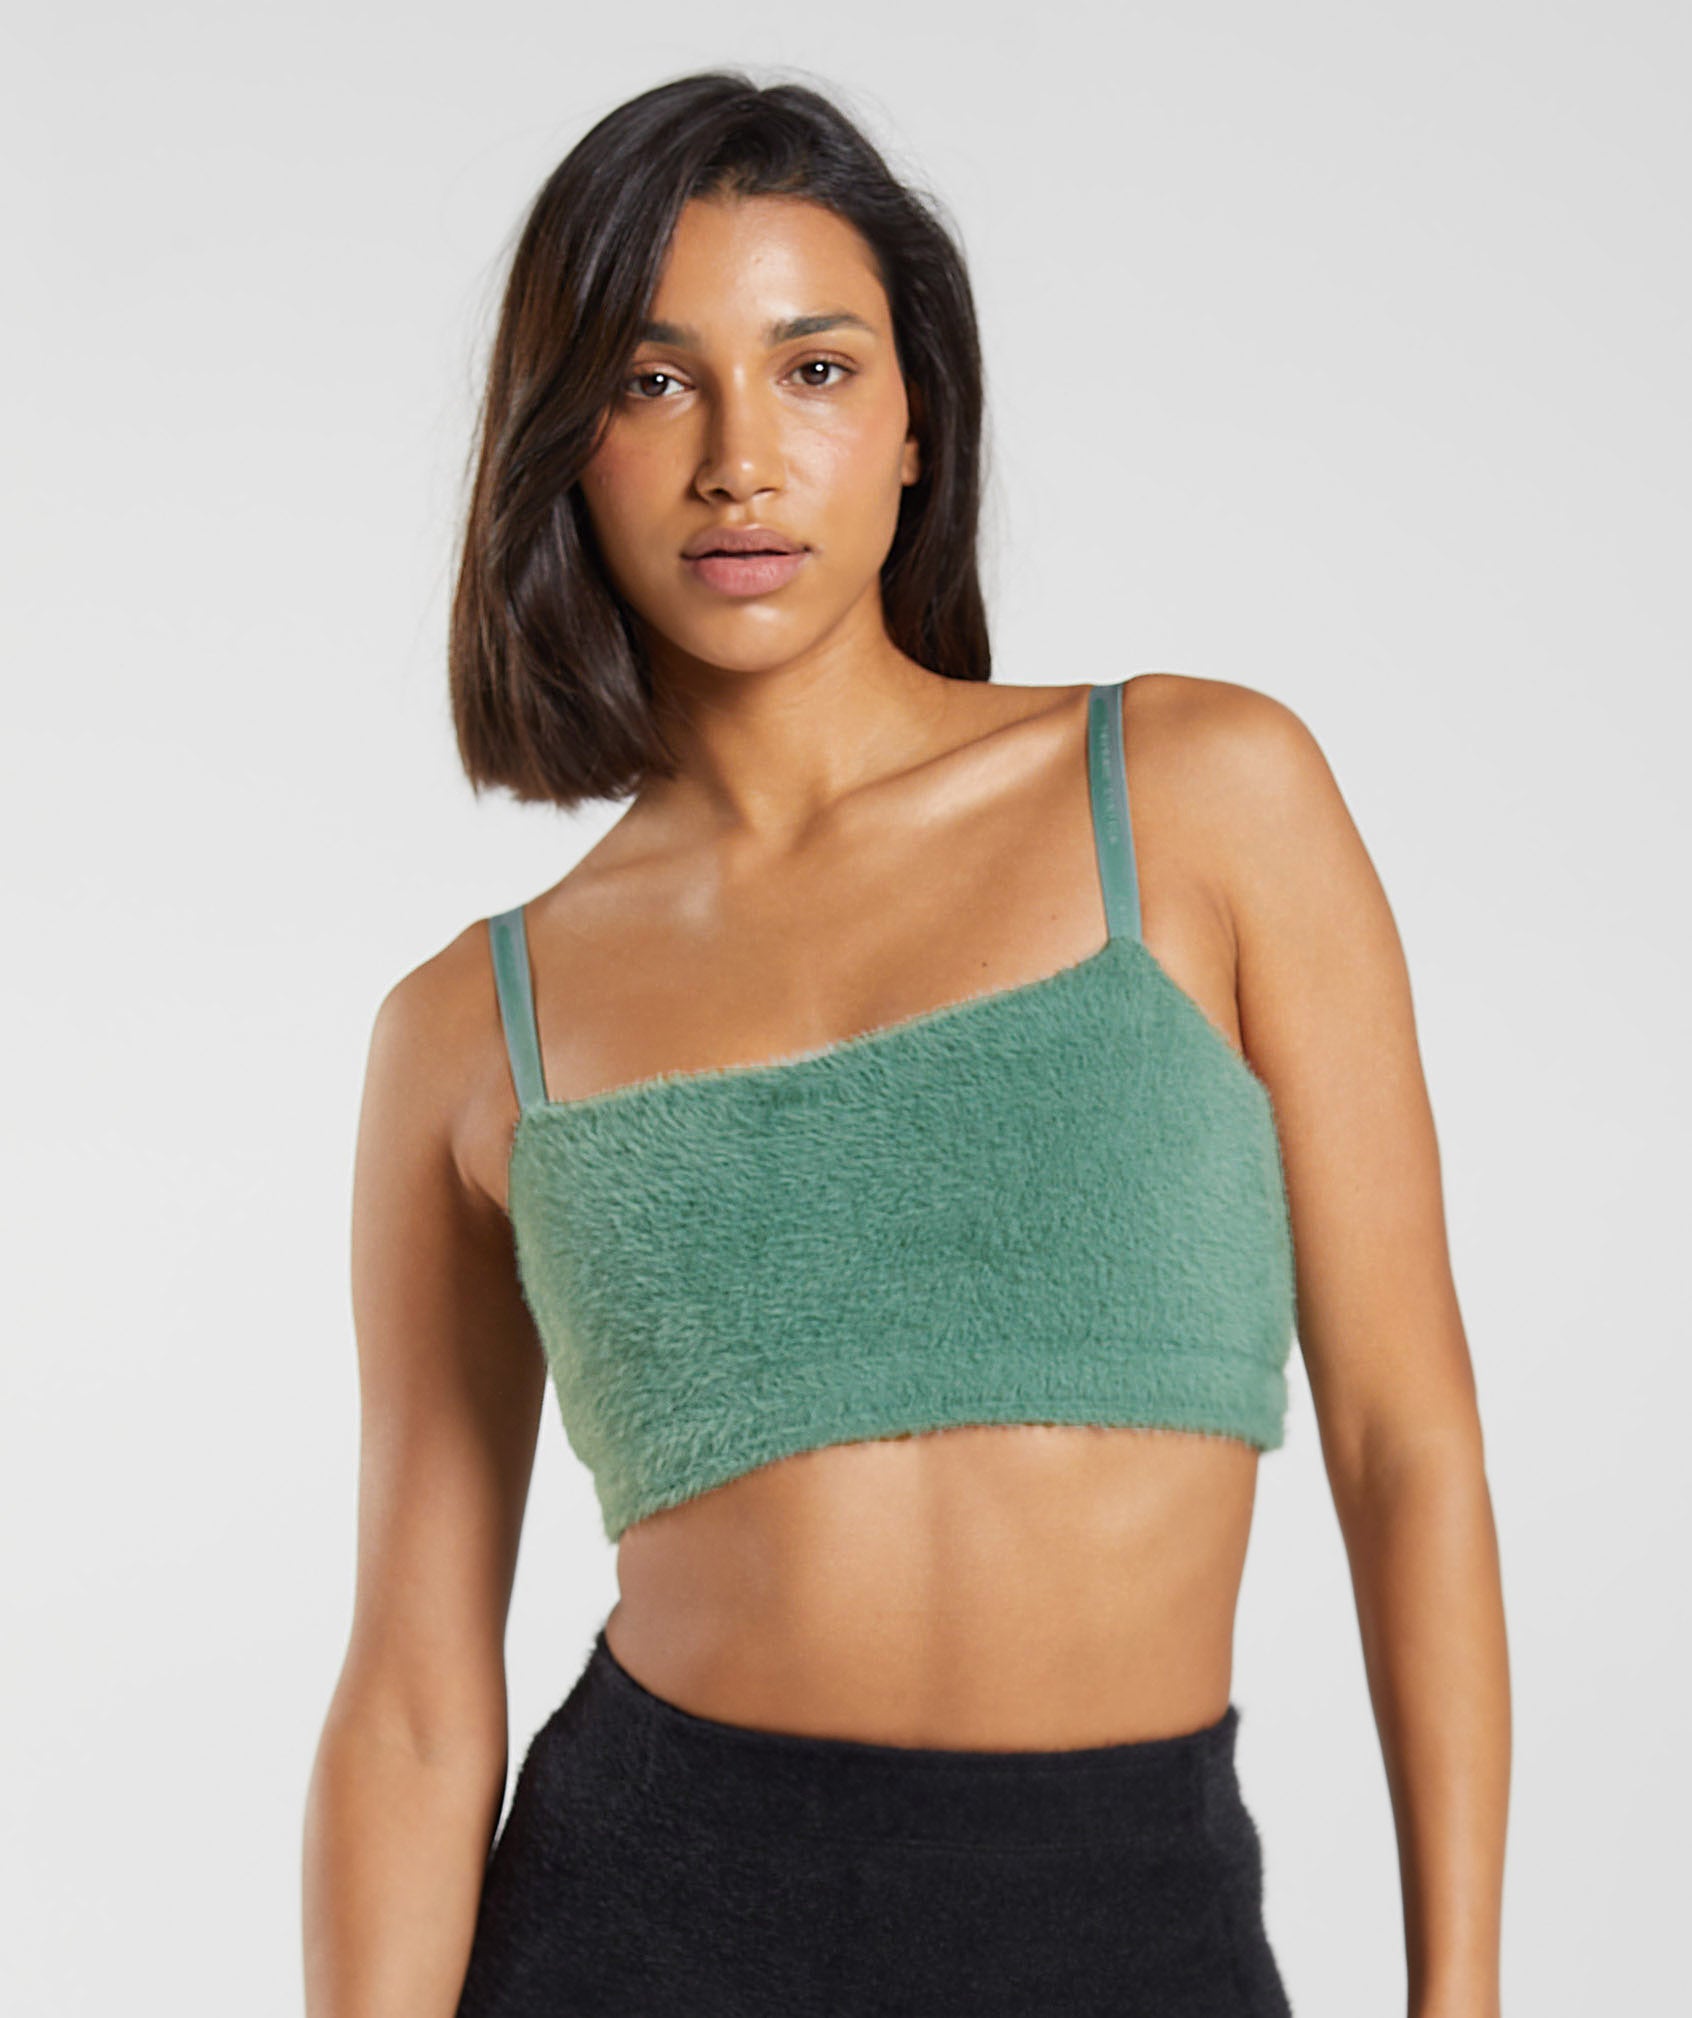 Gymshark X Whitney Simmons Sports Bra Black Small Keyhole Crop Top Nylon  for sale online